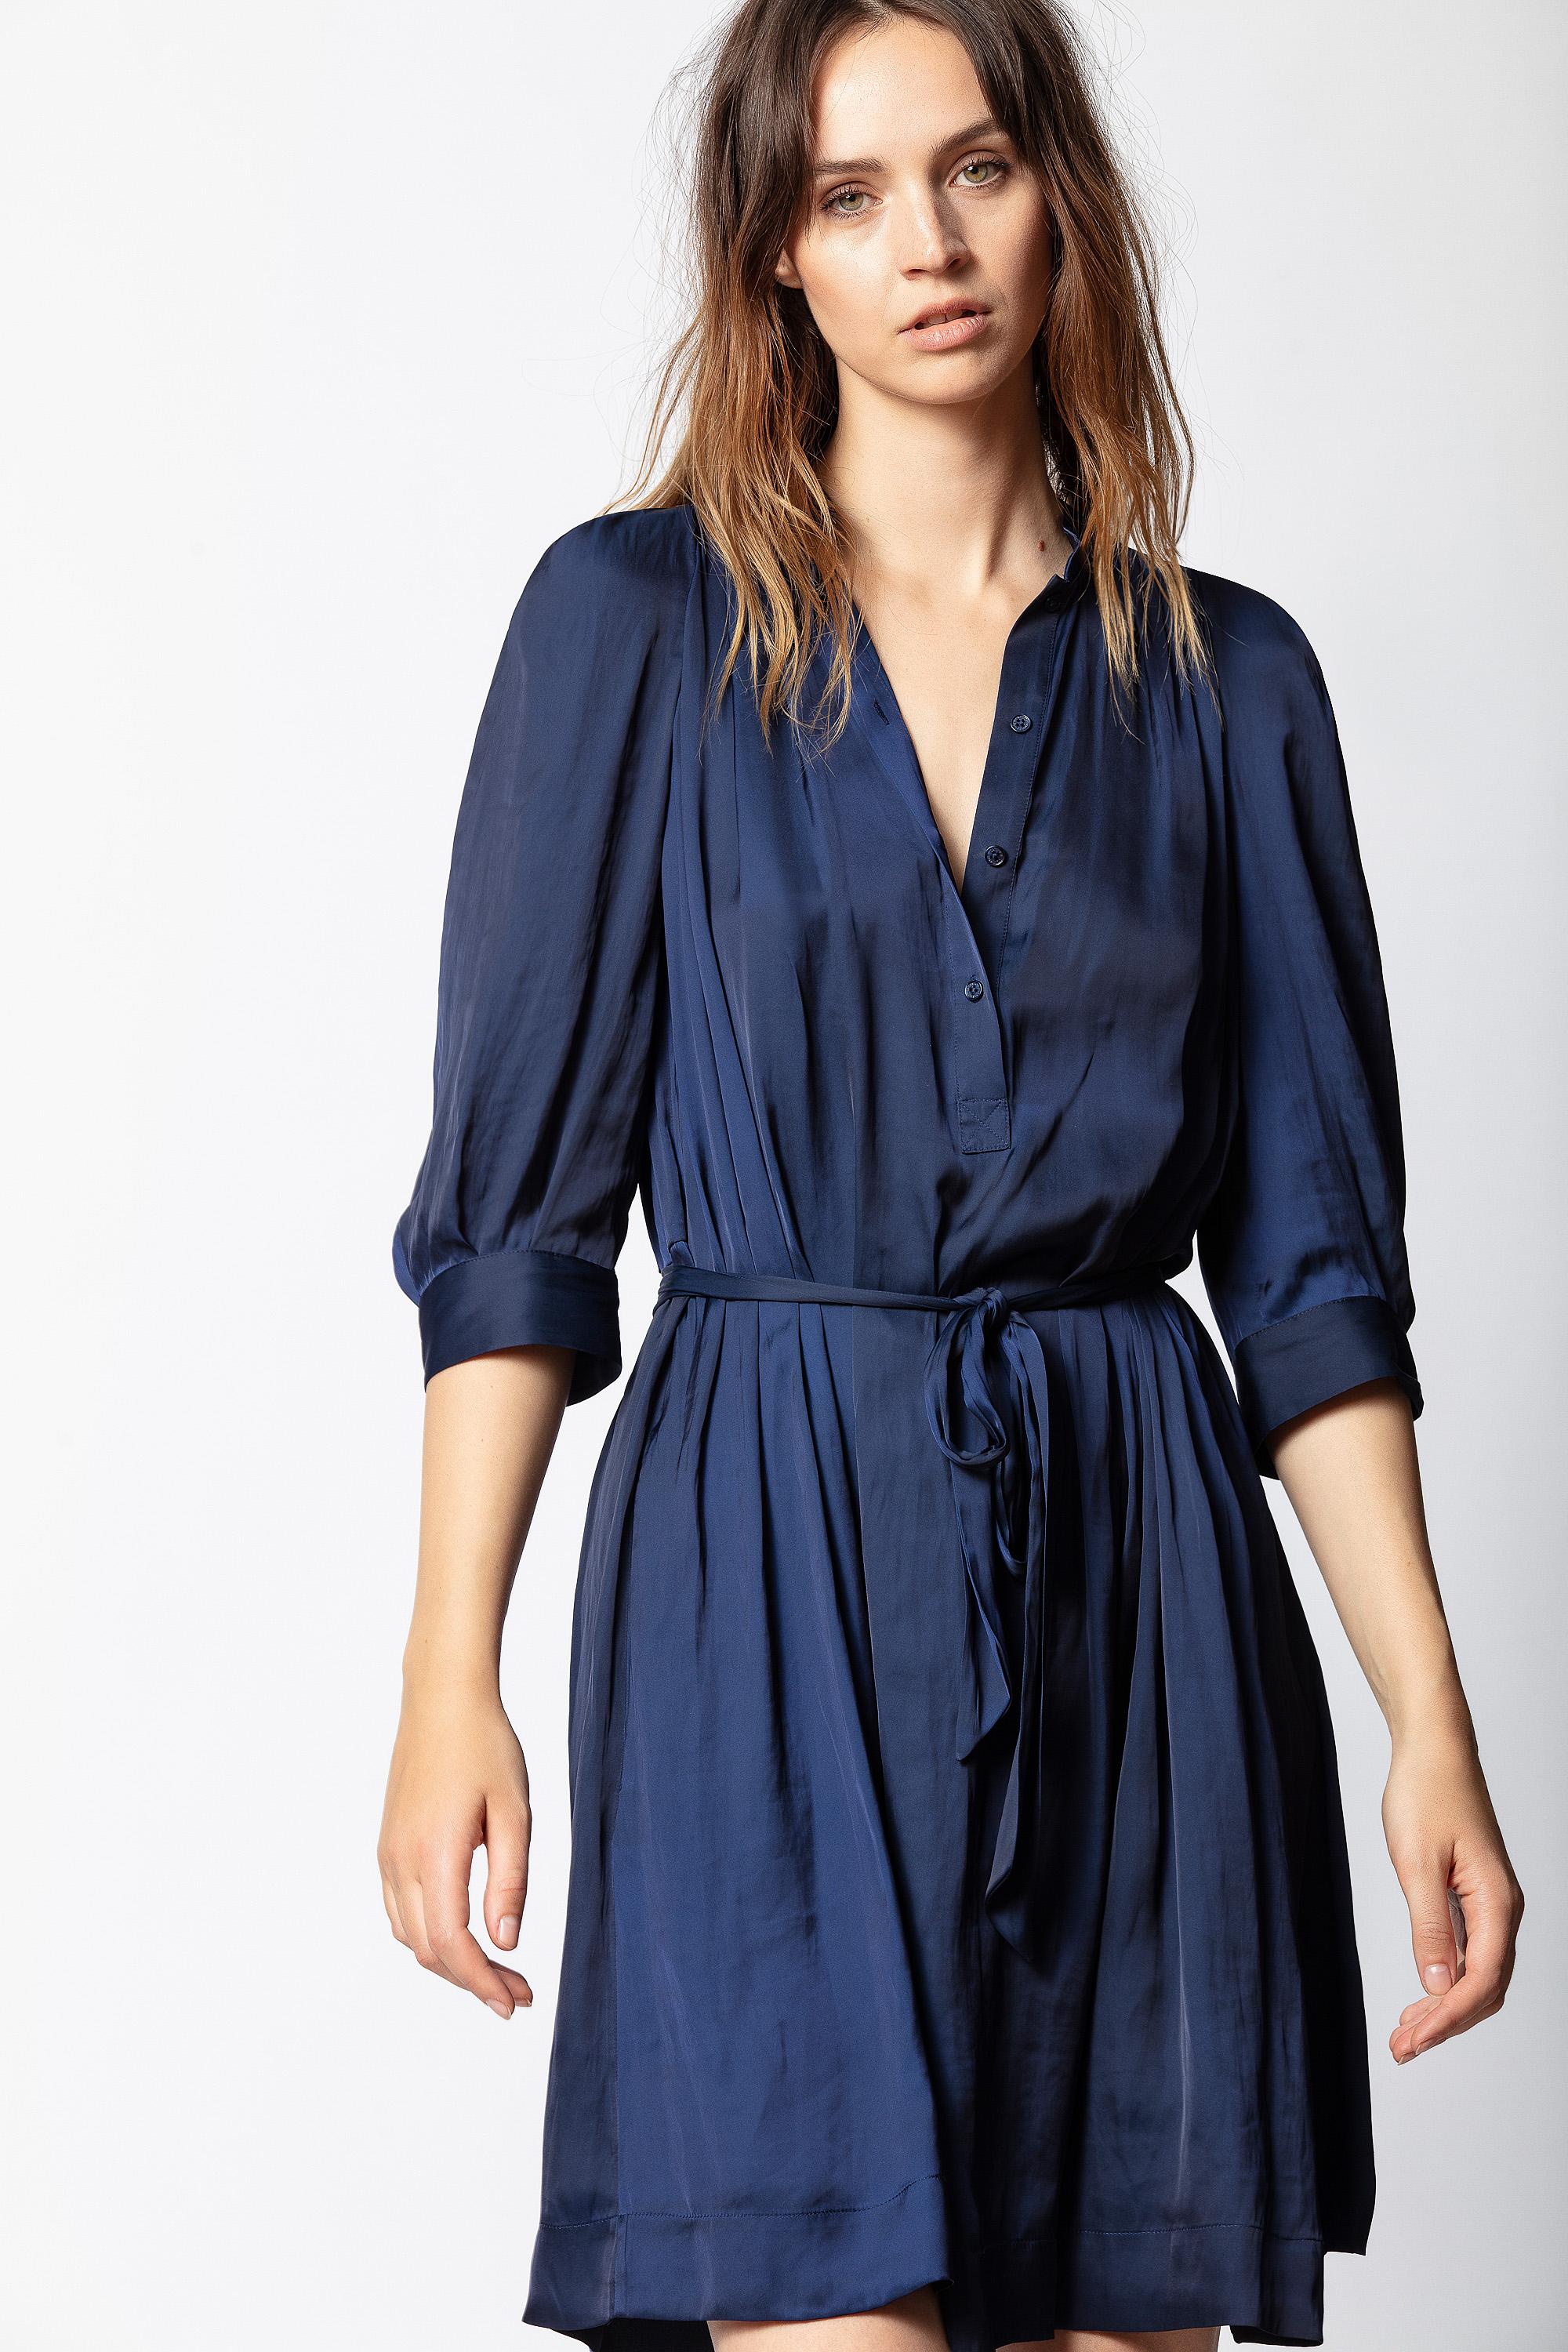 Zadig & Voltaire Retouch Satin Dress in Blue - Lyst